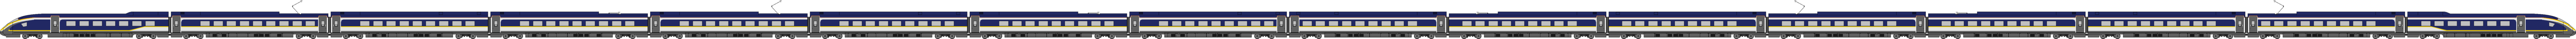 Illustration of the side profile of an e320 unit in current Eurostar livery